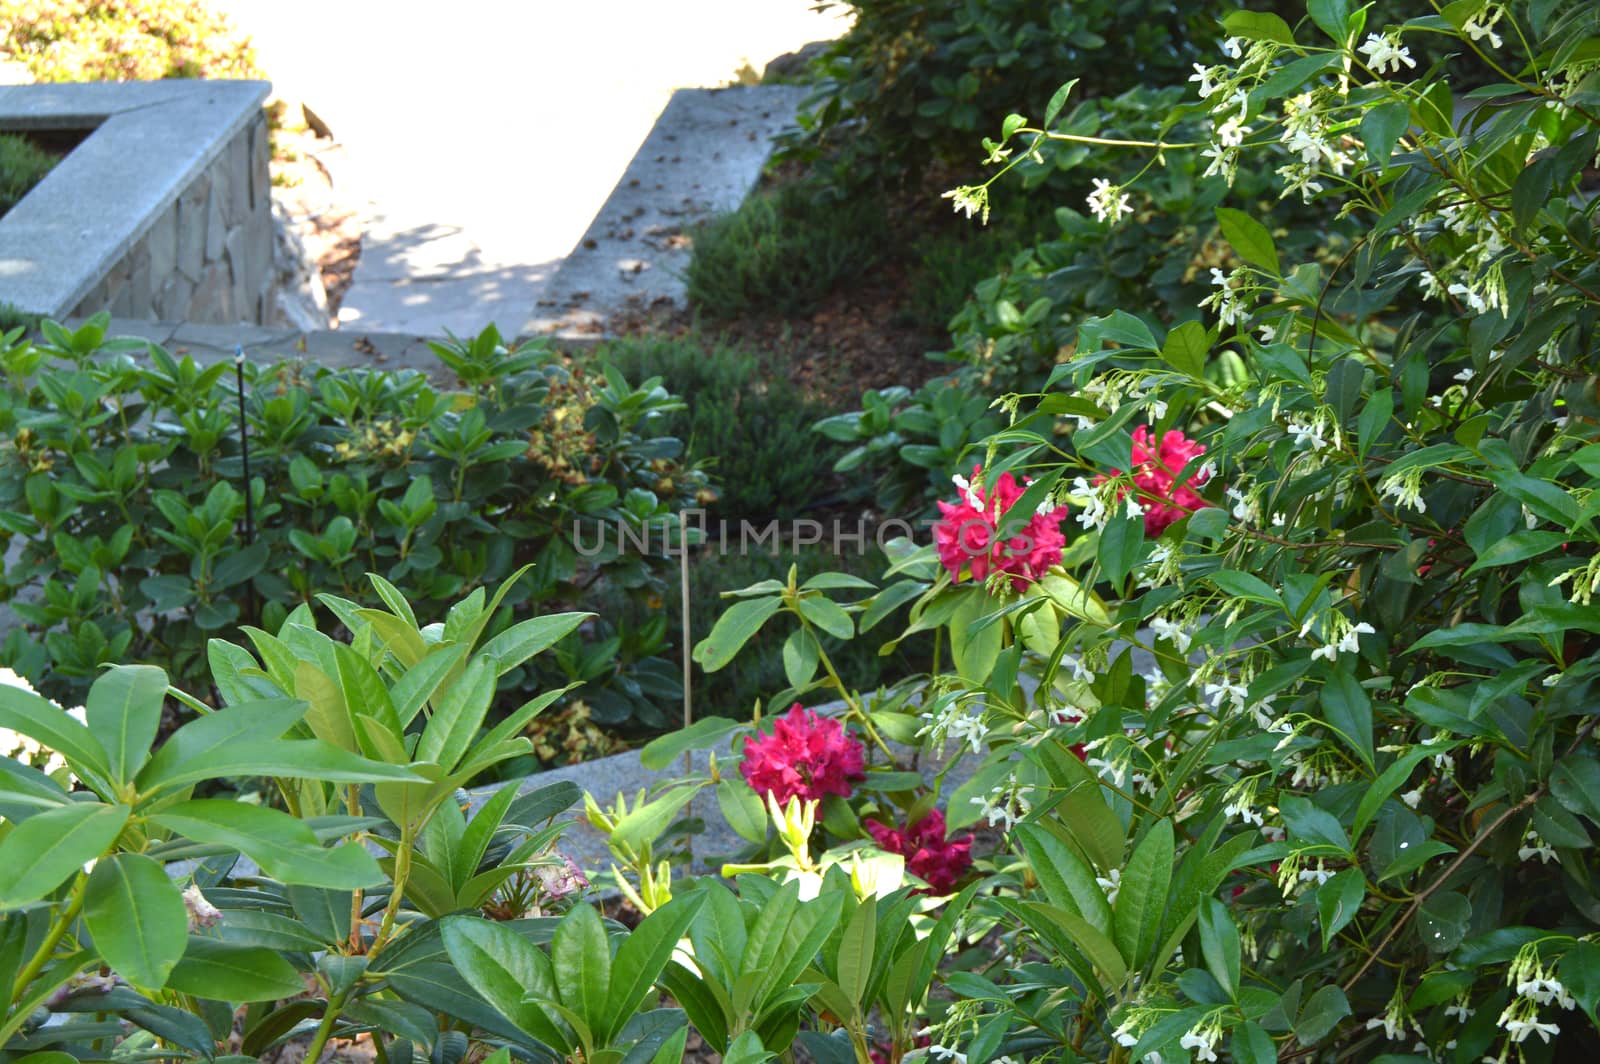 Framed view of flowers in the foreground, blurred background of the Park, summer Sunny day.